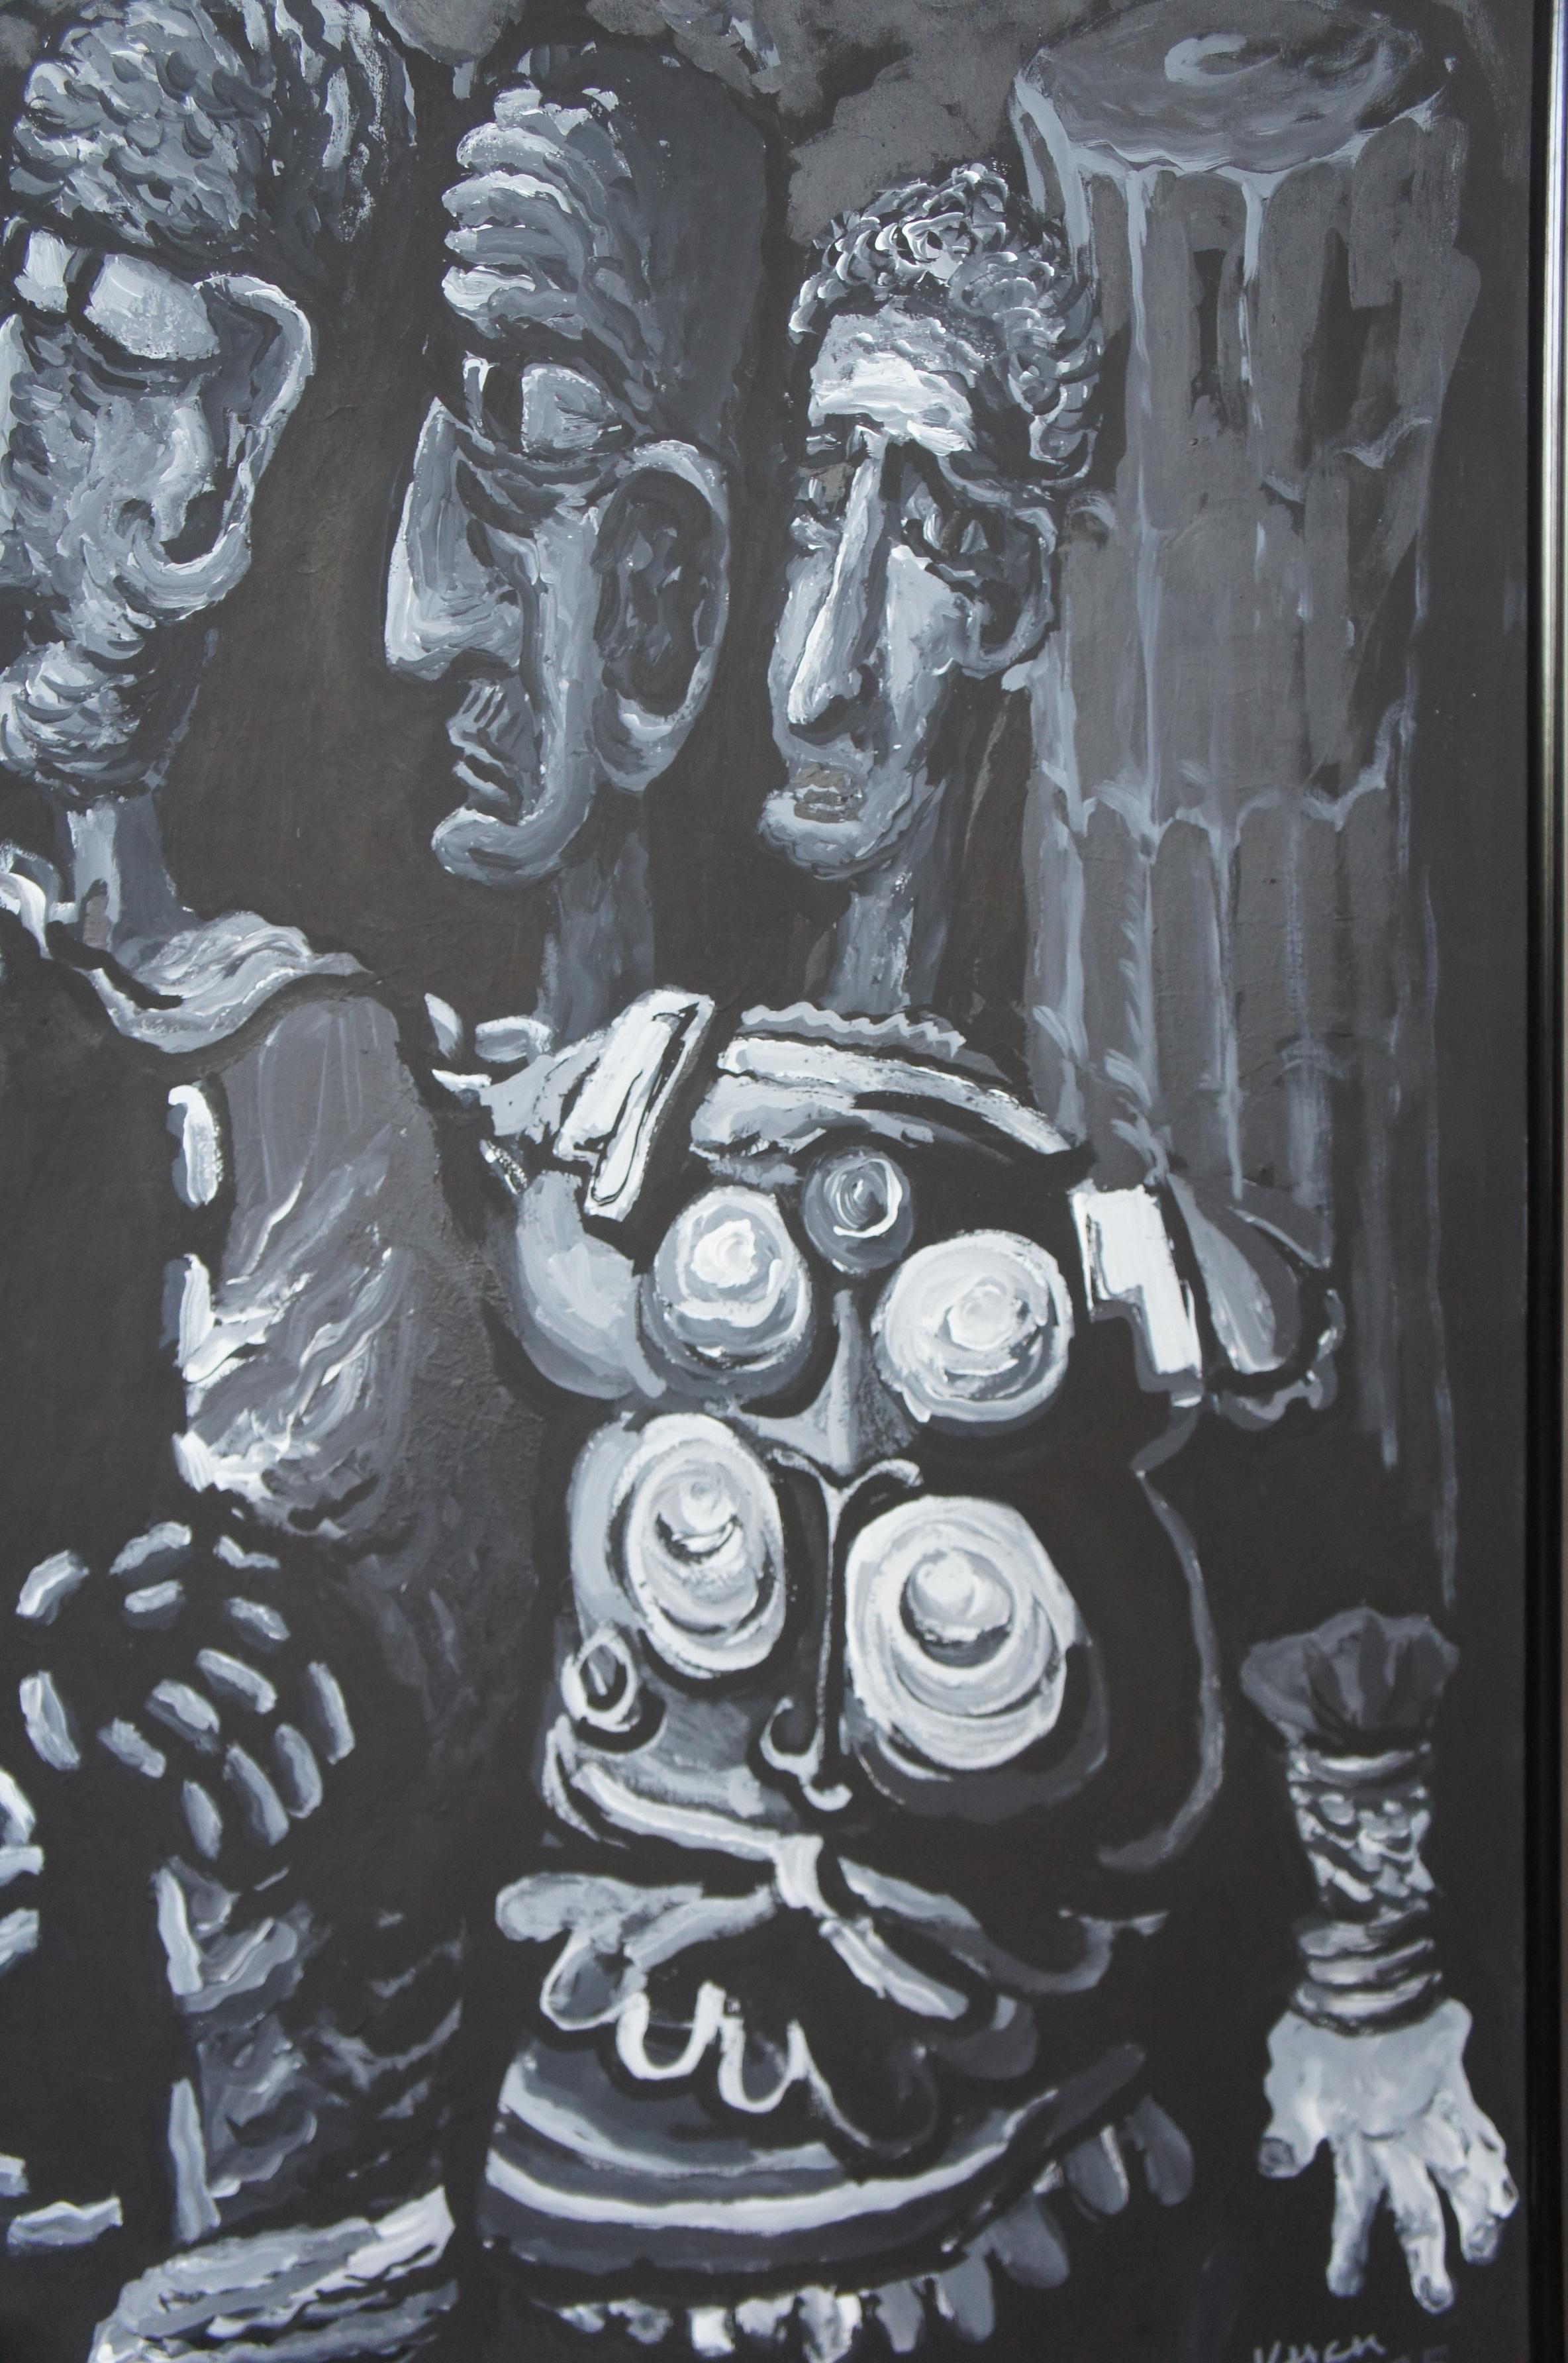 Canvas The Senate by Tom Keesee 1985 Black and White Expressionist Acrylic Painting For Sale